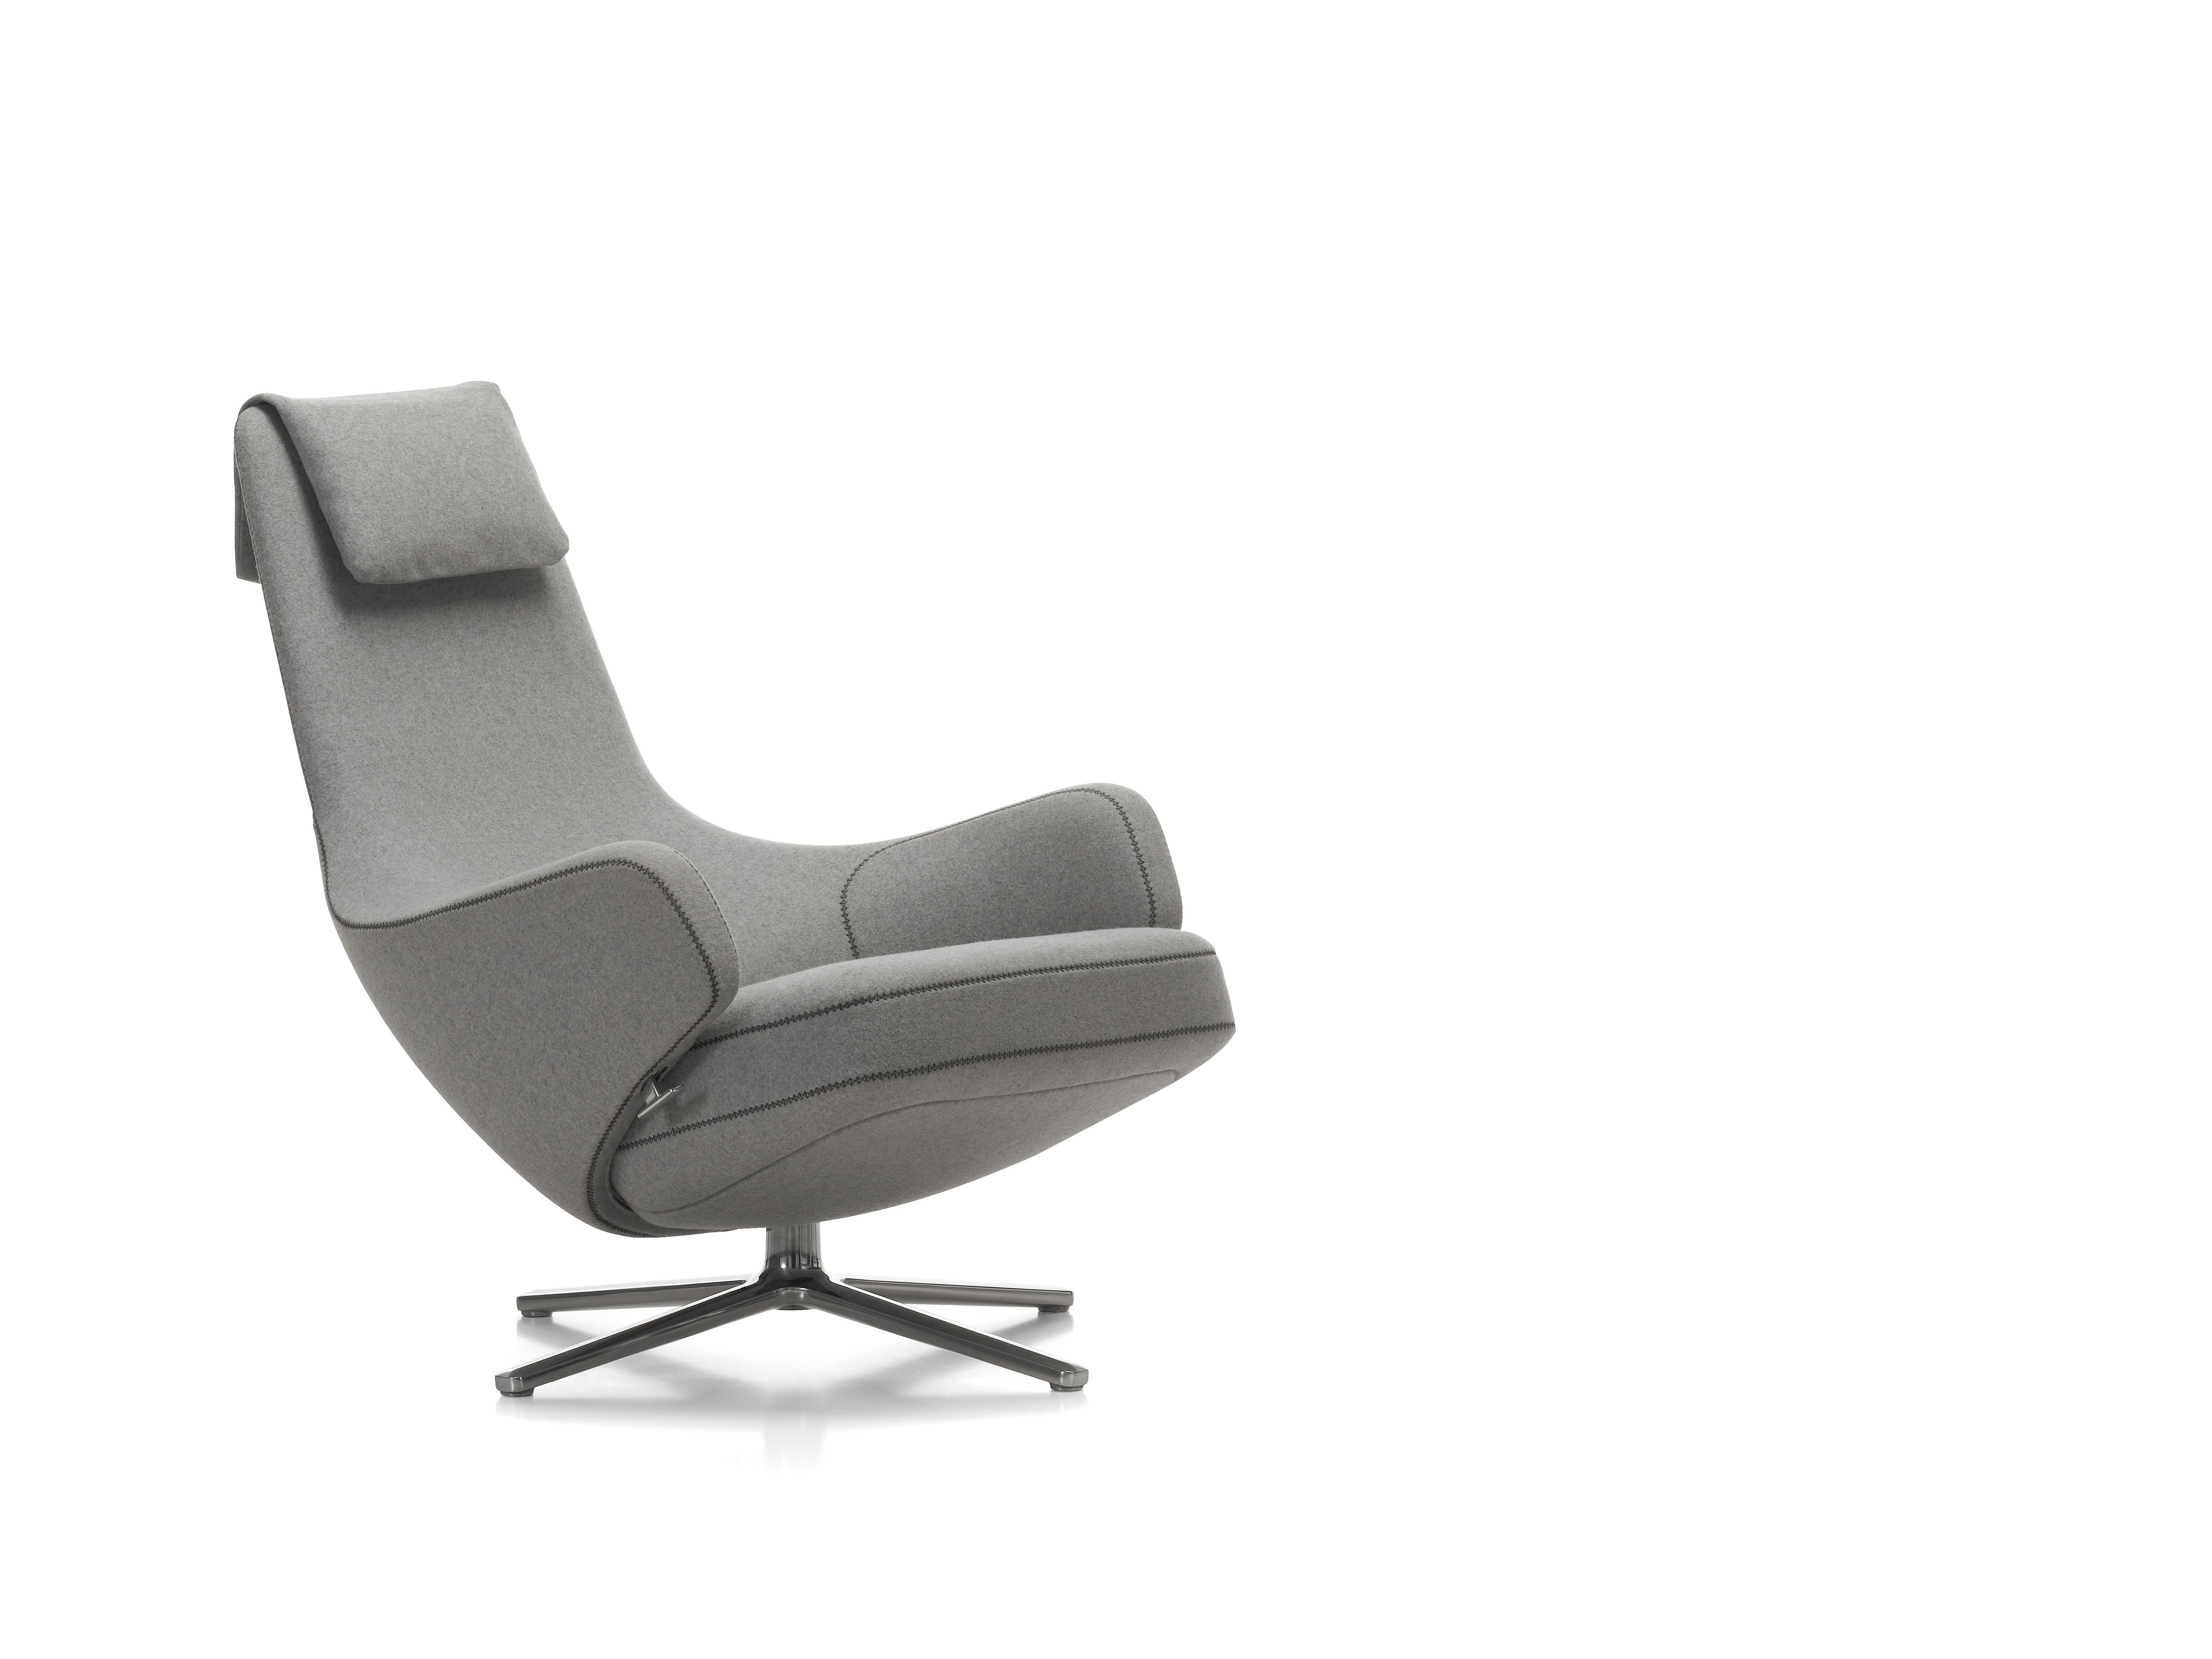 Vitra Repos Lounge Chair in Pebble Grey Cosy by Antonio Citterio In New Condition For Sale In New York, NY